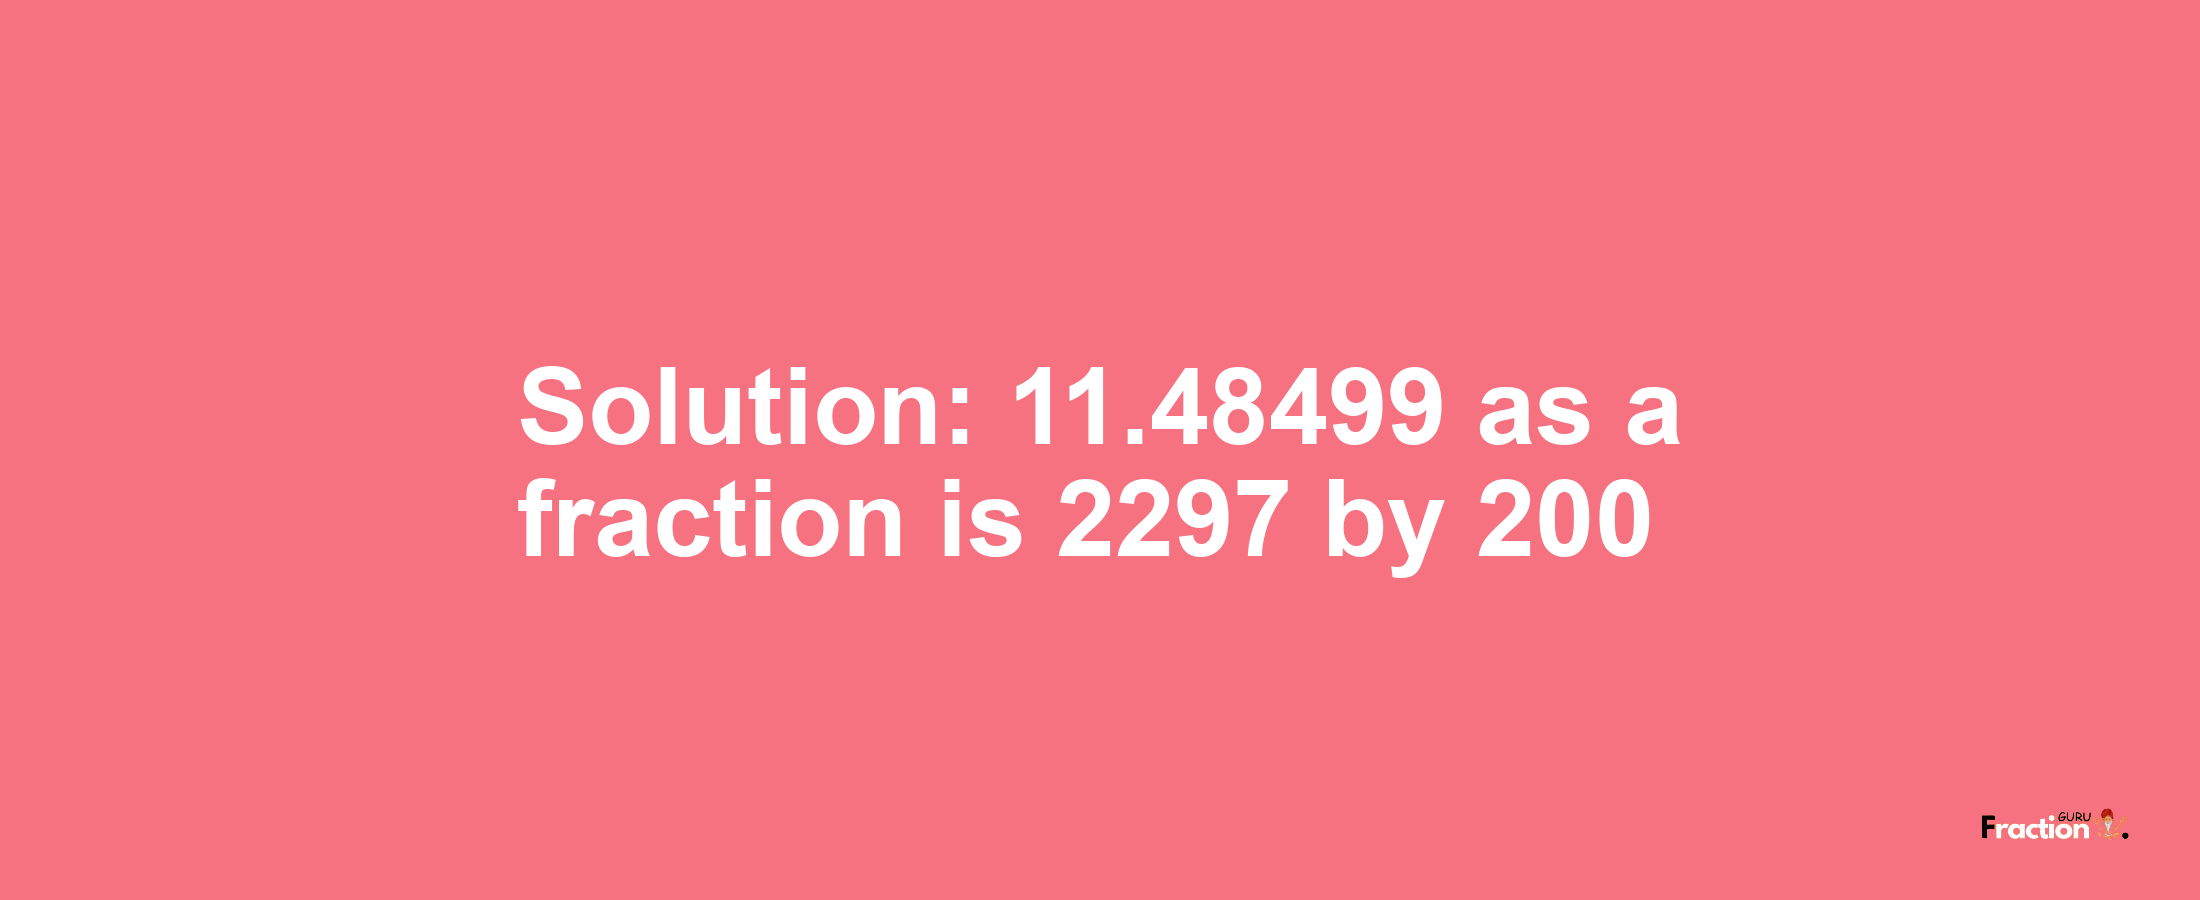 Solution:11.48499 as a fraction is 2297/200